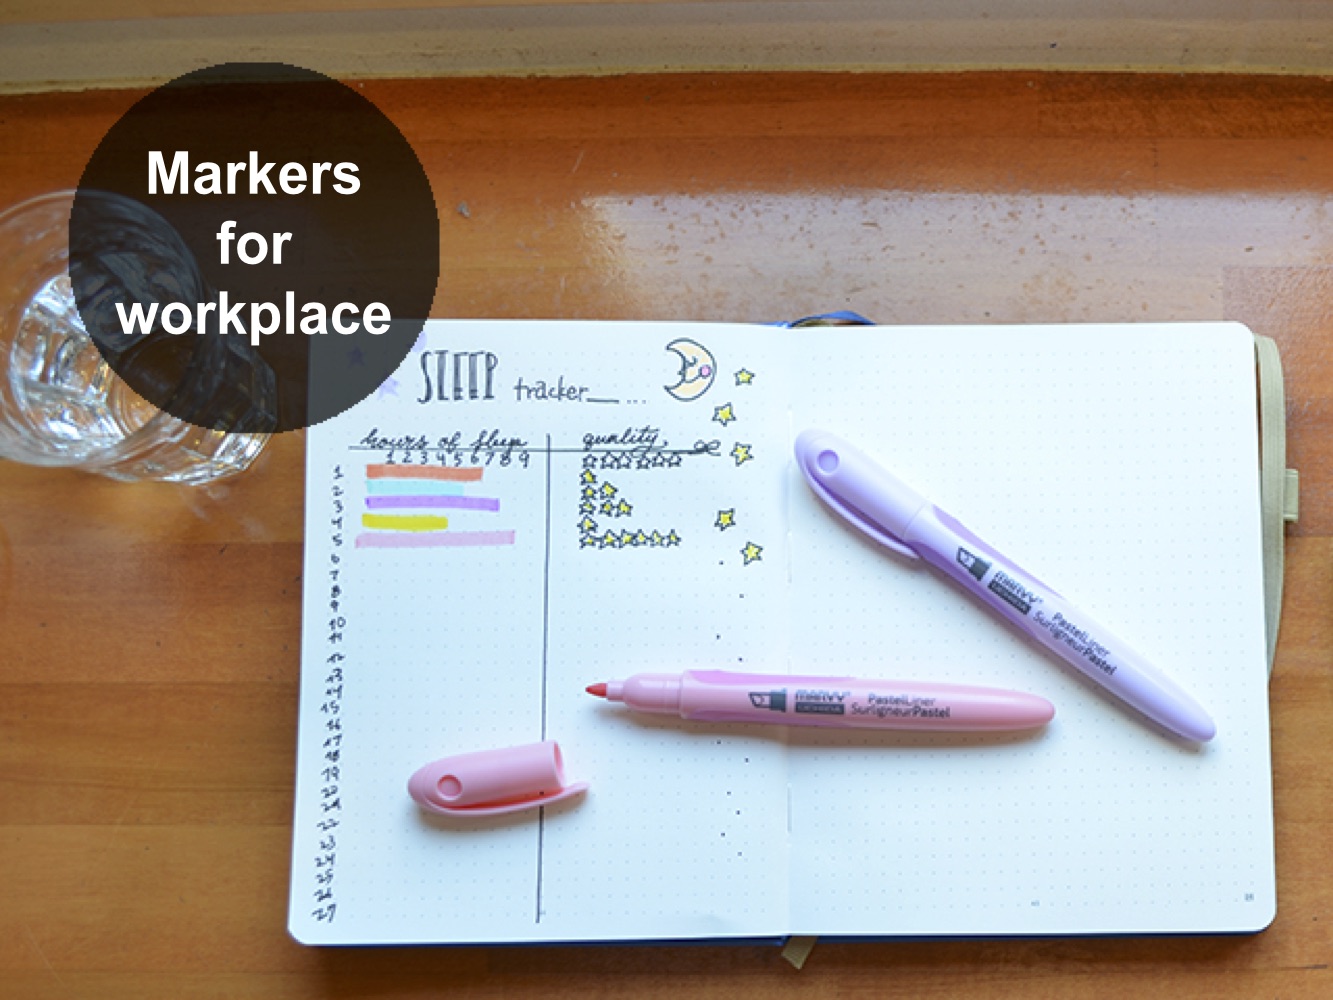 Markers for workplace